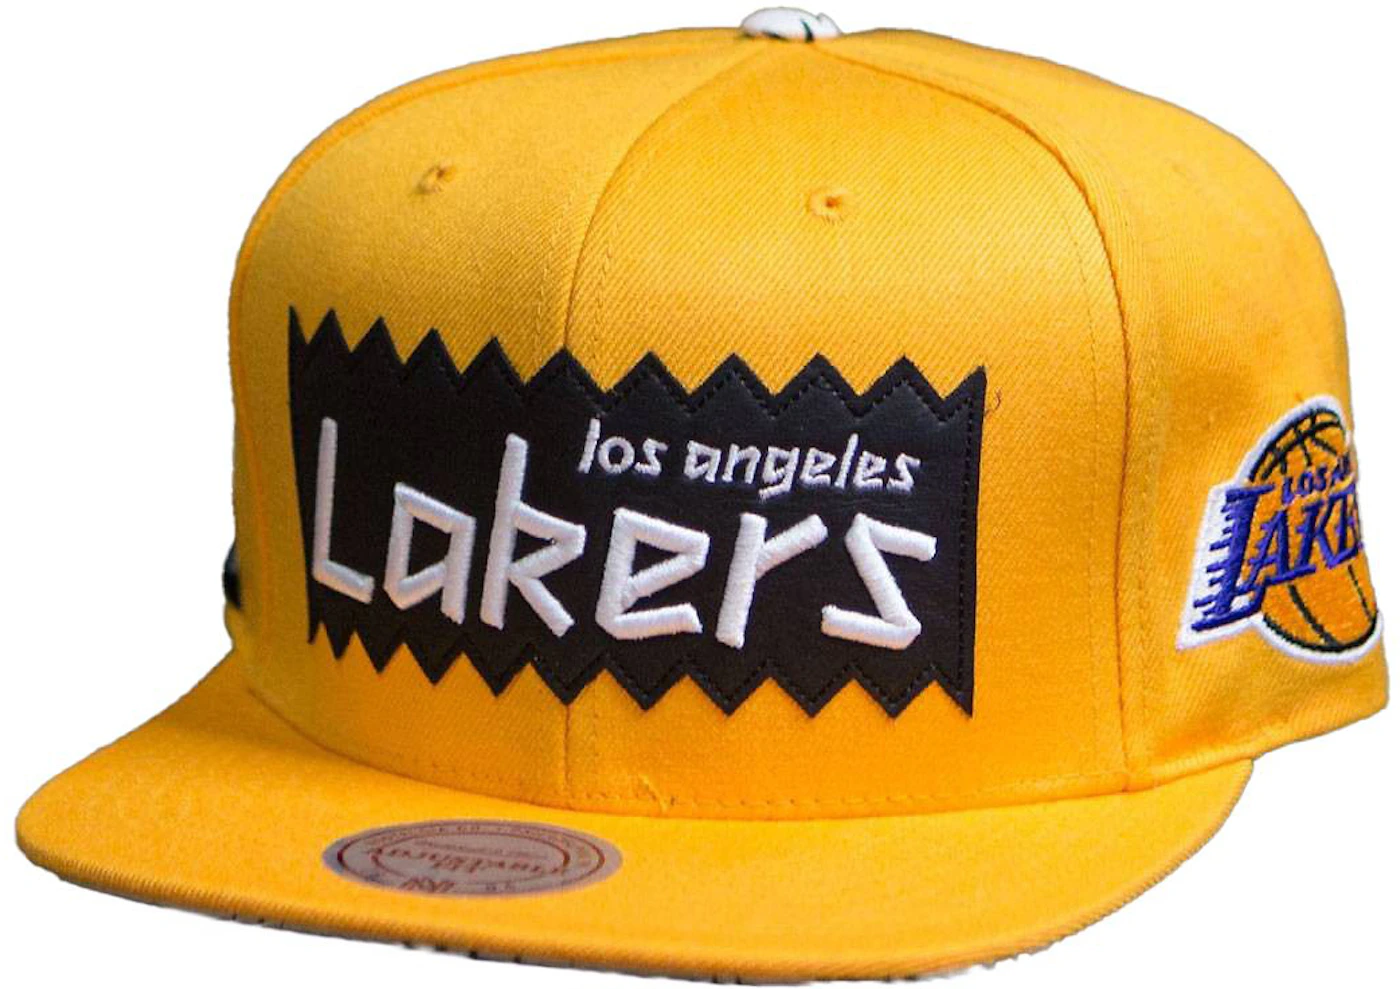 Mitchell & Ness Los Angeles Lakers White Gold Pop Snapback Hat